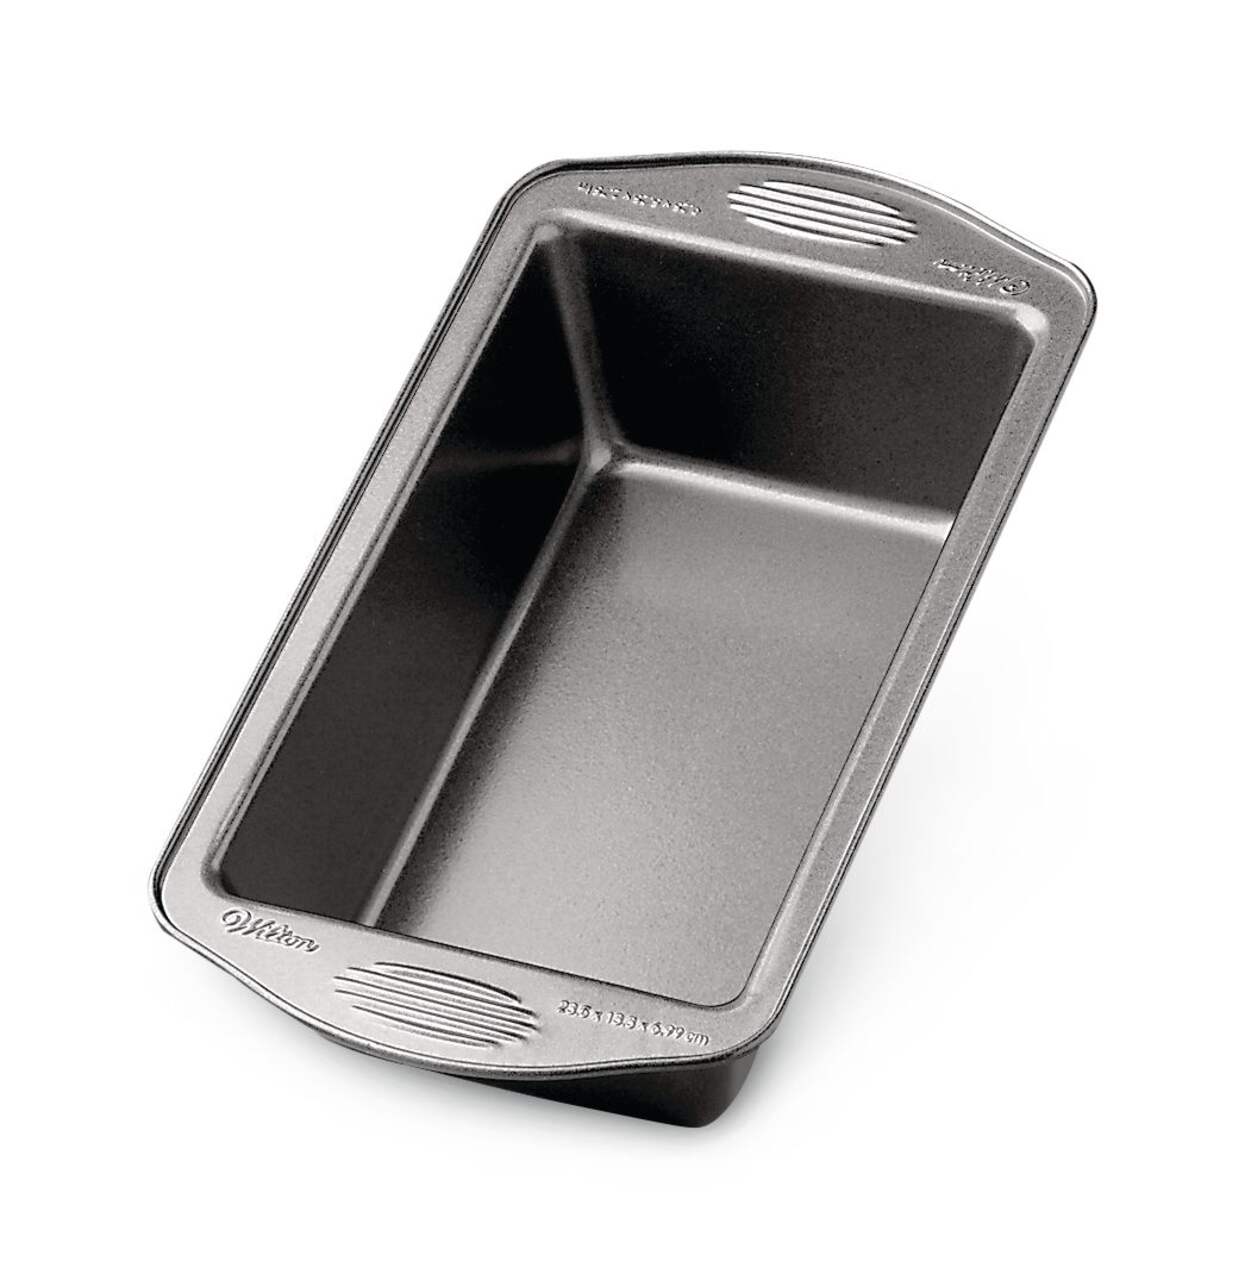 https://media-www.canadiantire.ca/product/living/kitchen/bakeware-baking-prep/0420547/wilton-gourmet-choice-loaf-large-991791d3-1388-4e63-a3d8-2e9049e6a528-jpgrendition.jpg?imdensity=1&imwidth=640&impolicy=mZoom